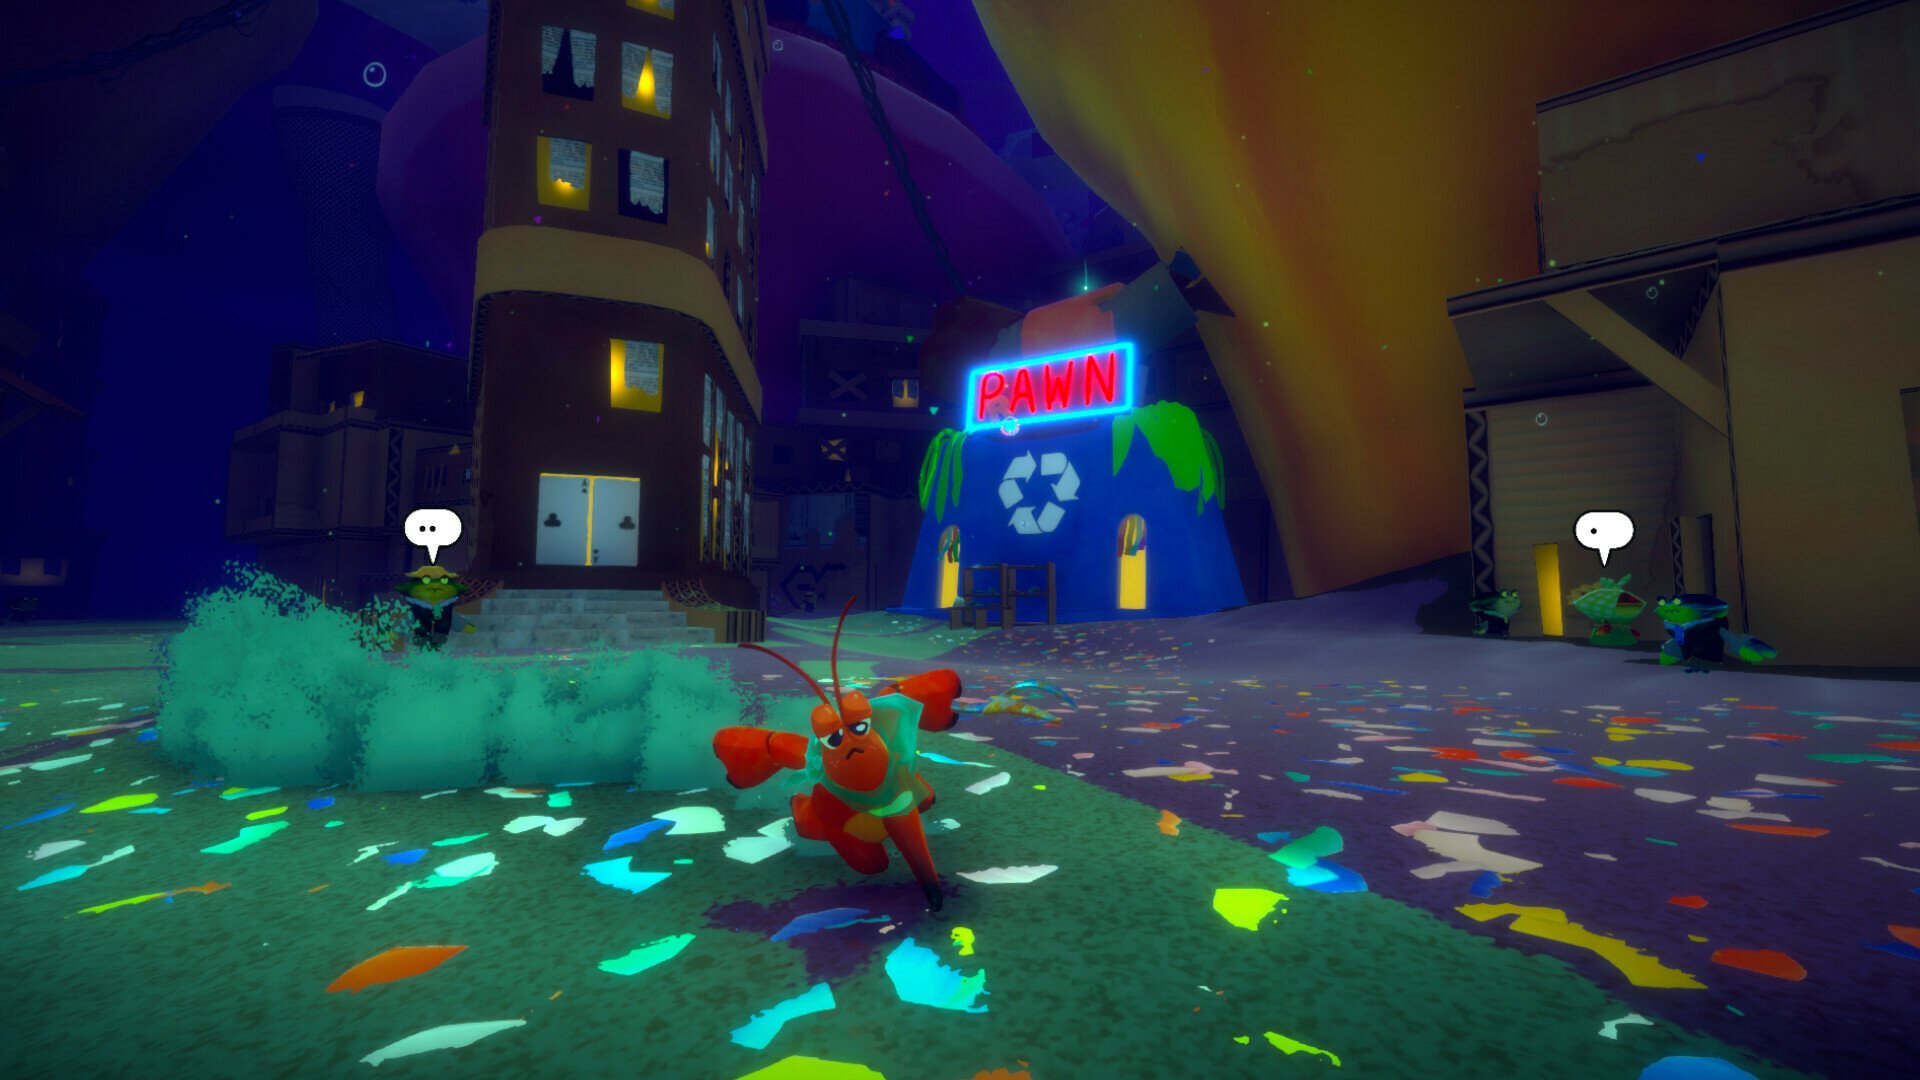 HD desktop wallpaper from Another Crab's Treasure video game featuring a vibrant night scene with a crab character in a colorful environment.